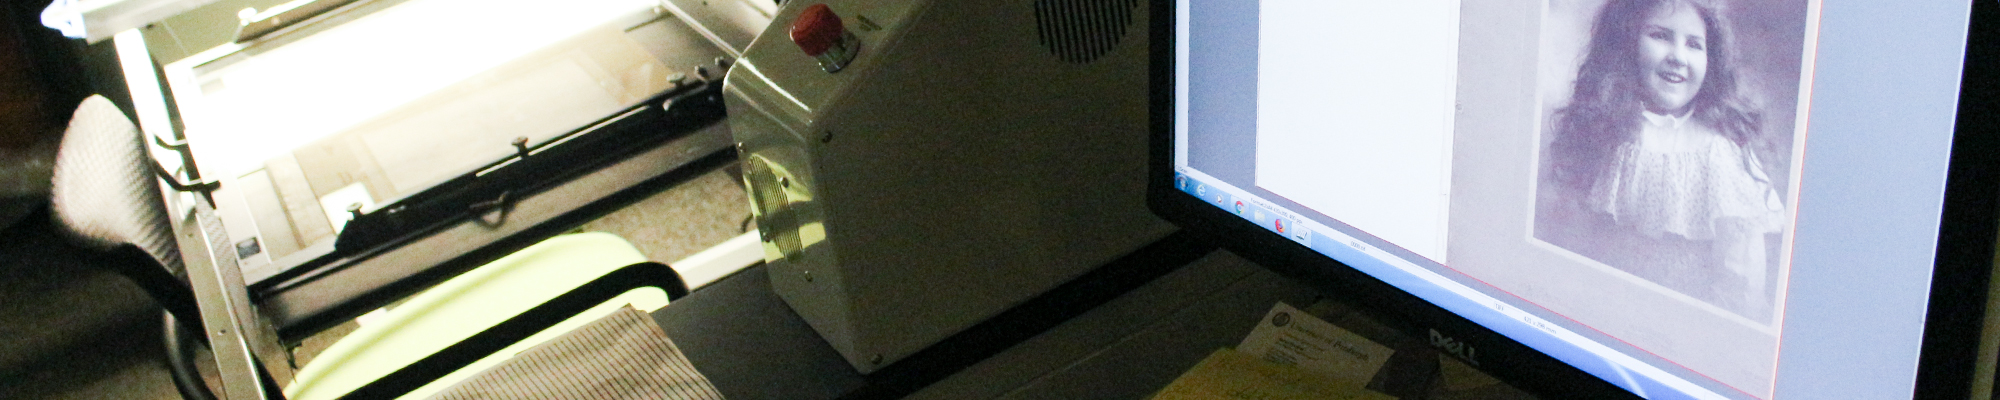 Using the Digibook scanner to scan a large photograph